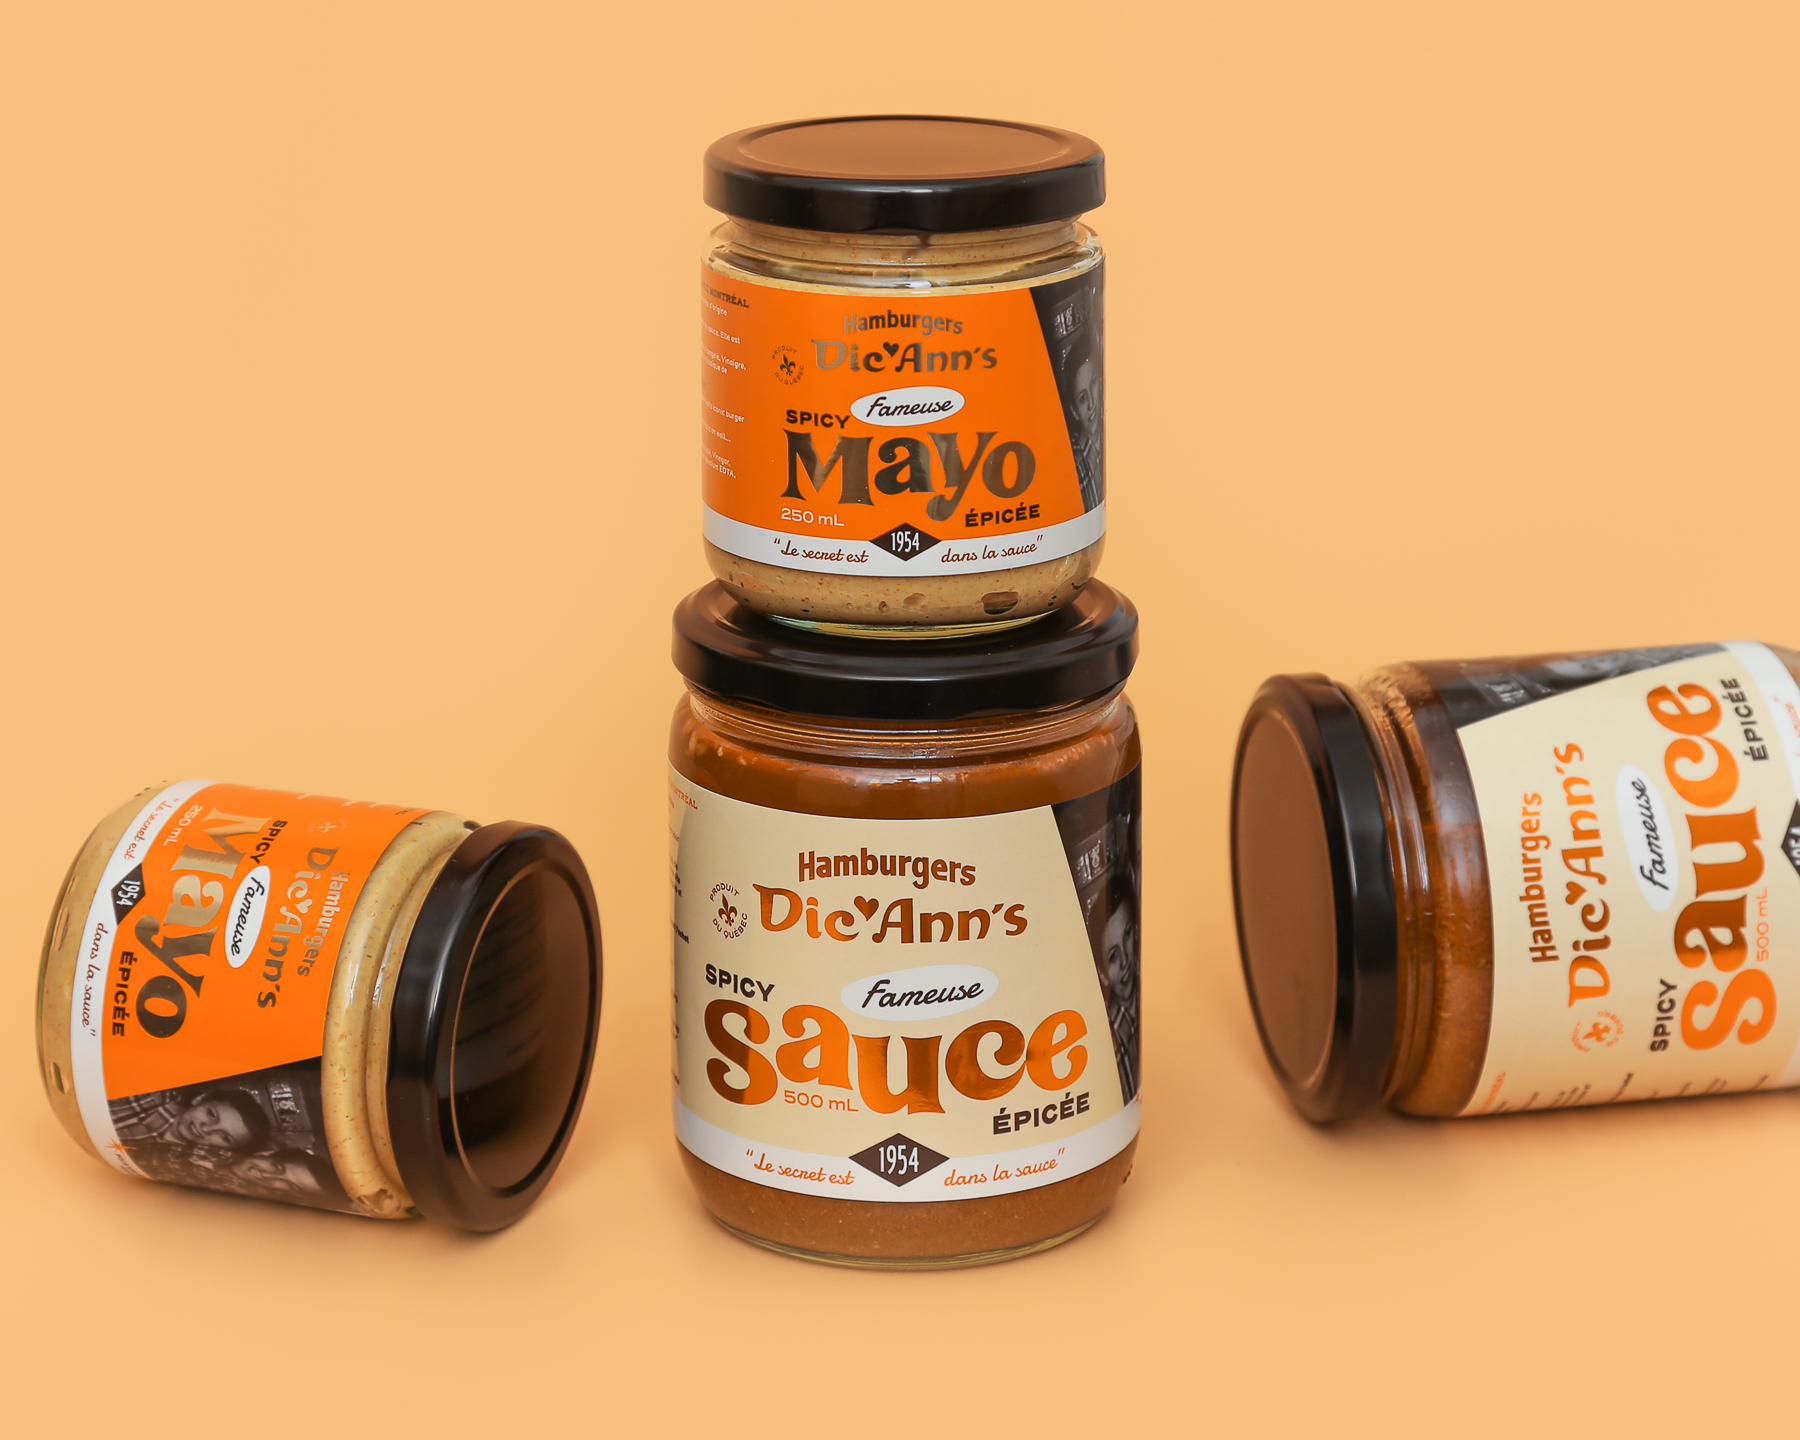 Dic Ann's Montreal Packaging Design Spicy Sauce Mayo Jars Recipe